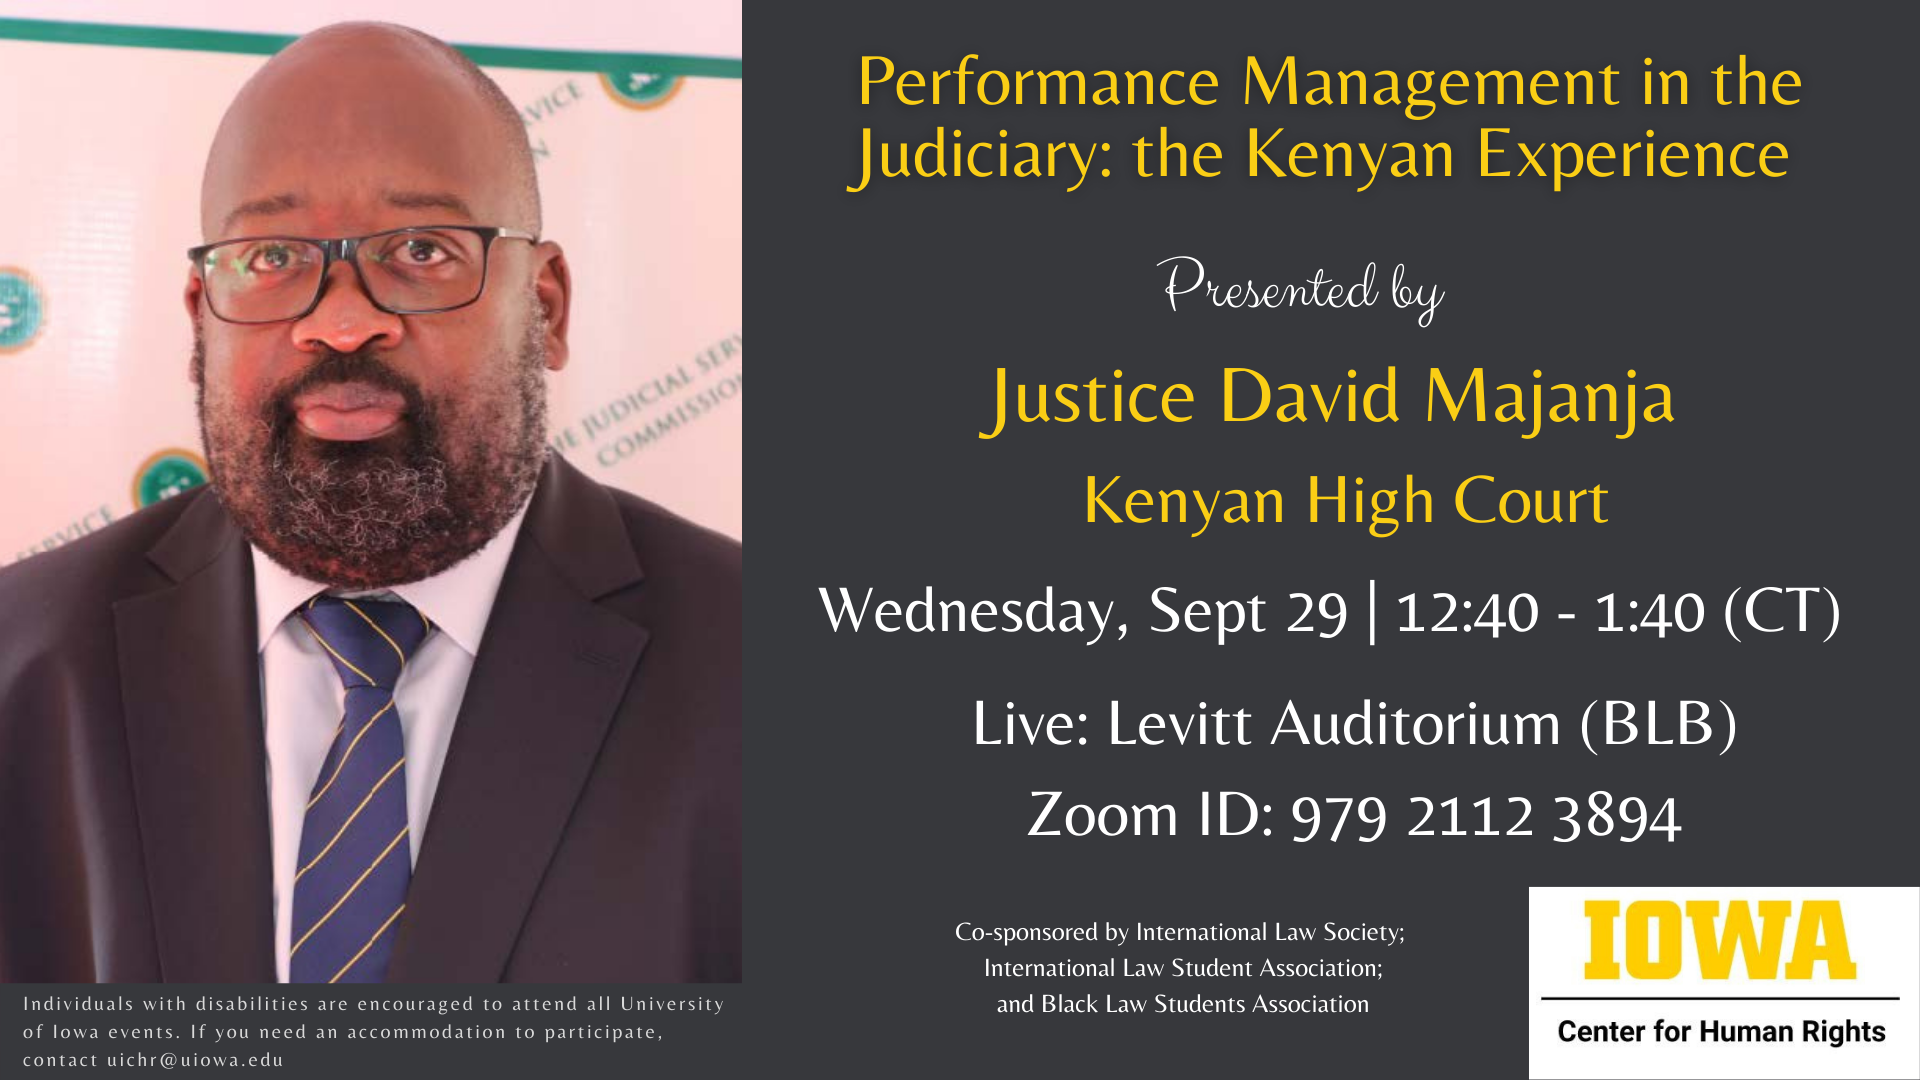 Performance Management in the Judiciary: The Kenyan Experience poster